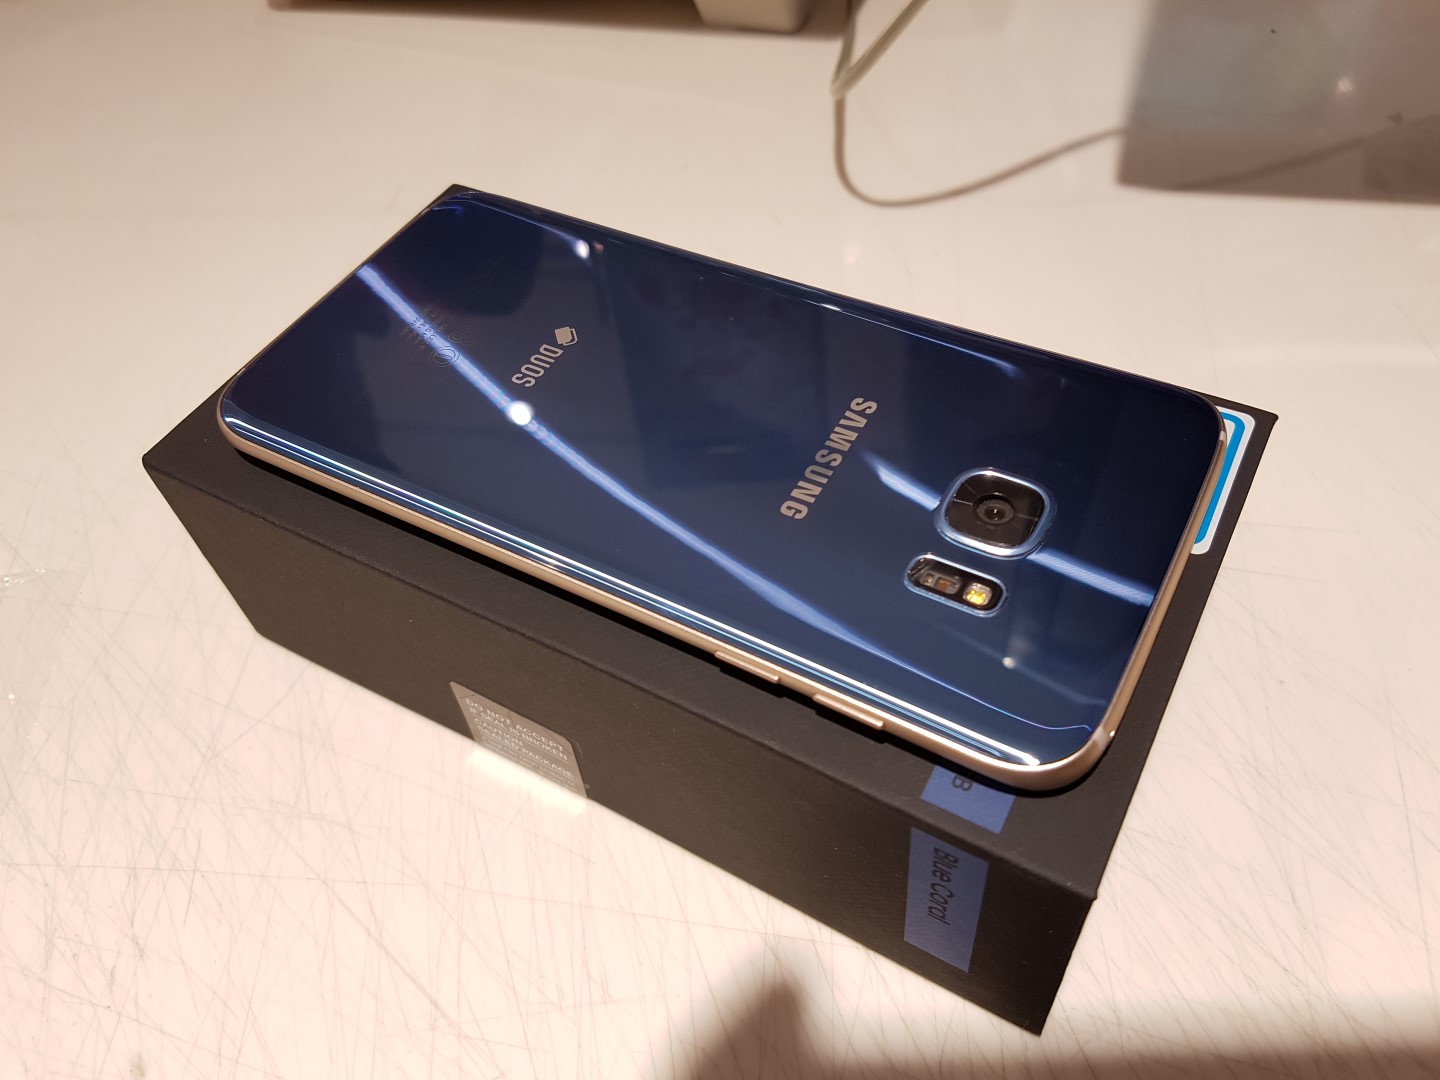 Check out these pictures of the Blue Coral Galaxy S7 edge ... - 1440 x 1080 jpeg 218kB